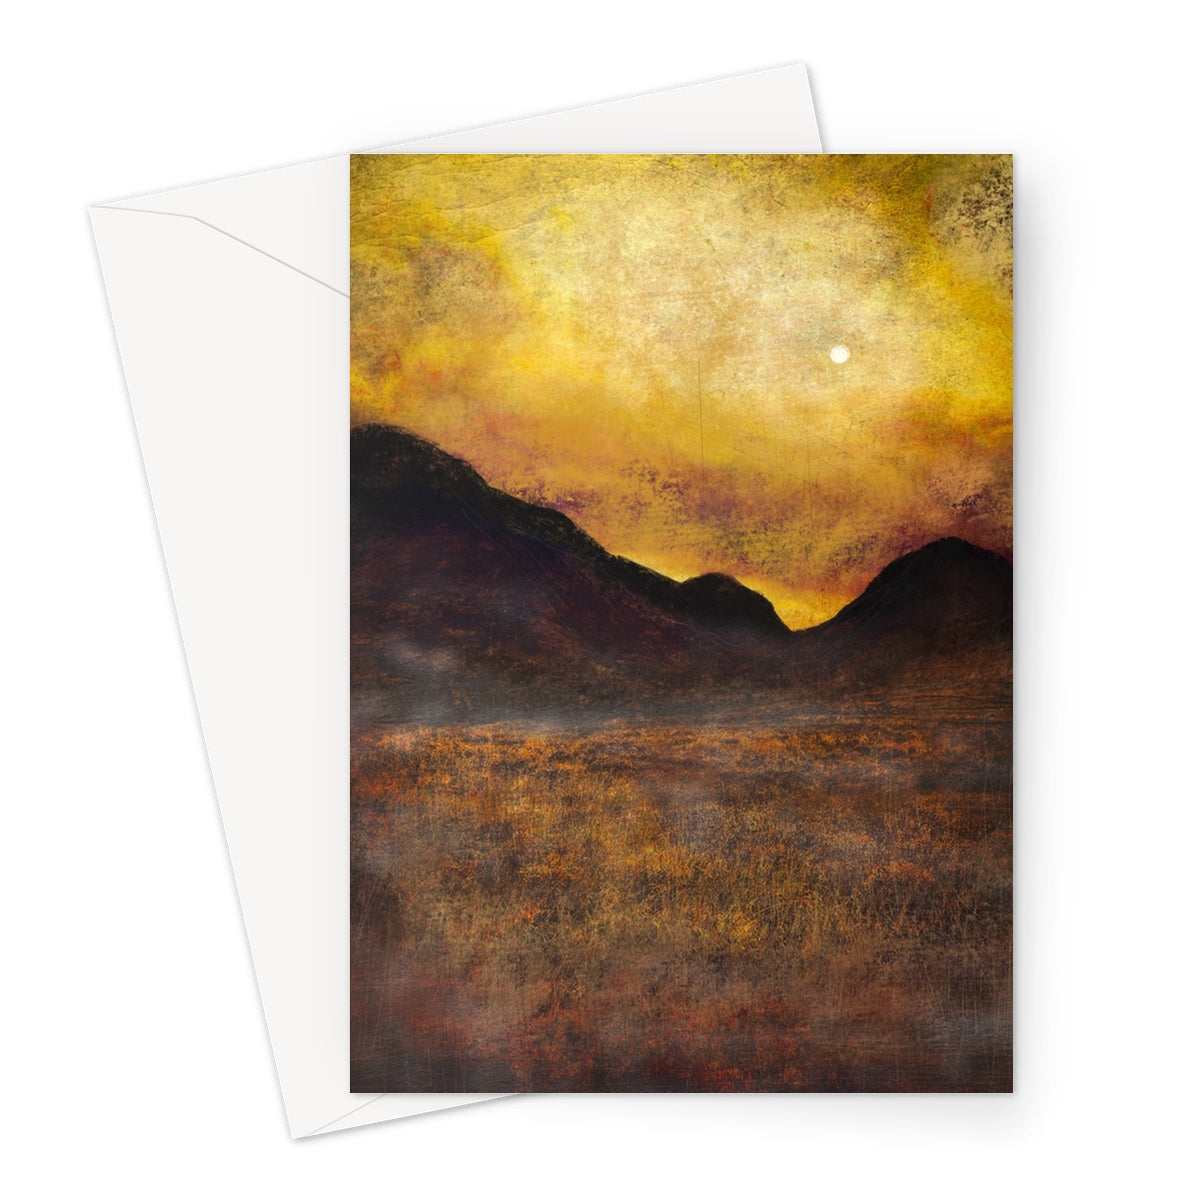 Glencoe Moonlight Art Gifts Greeting Card-Greetings Cards-Glencoe Art Gallery-A5 Portrait-1 Card-Paintings, Prints, Homeware, Art Gifts From Scotland By Scottish Artist Kevin Hunter